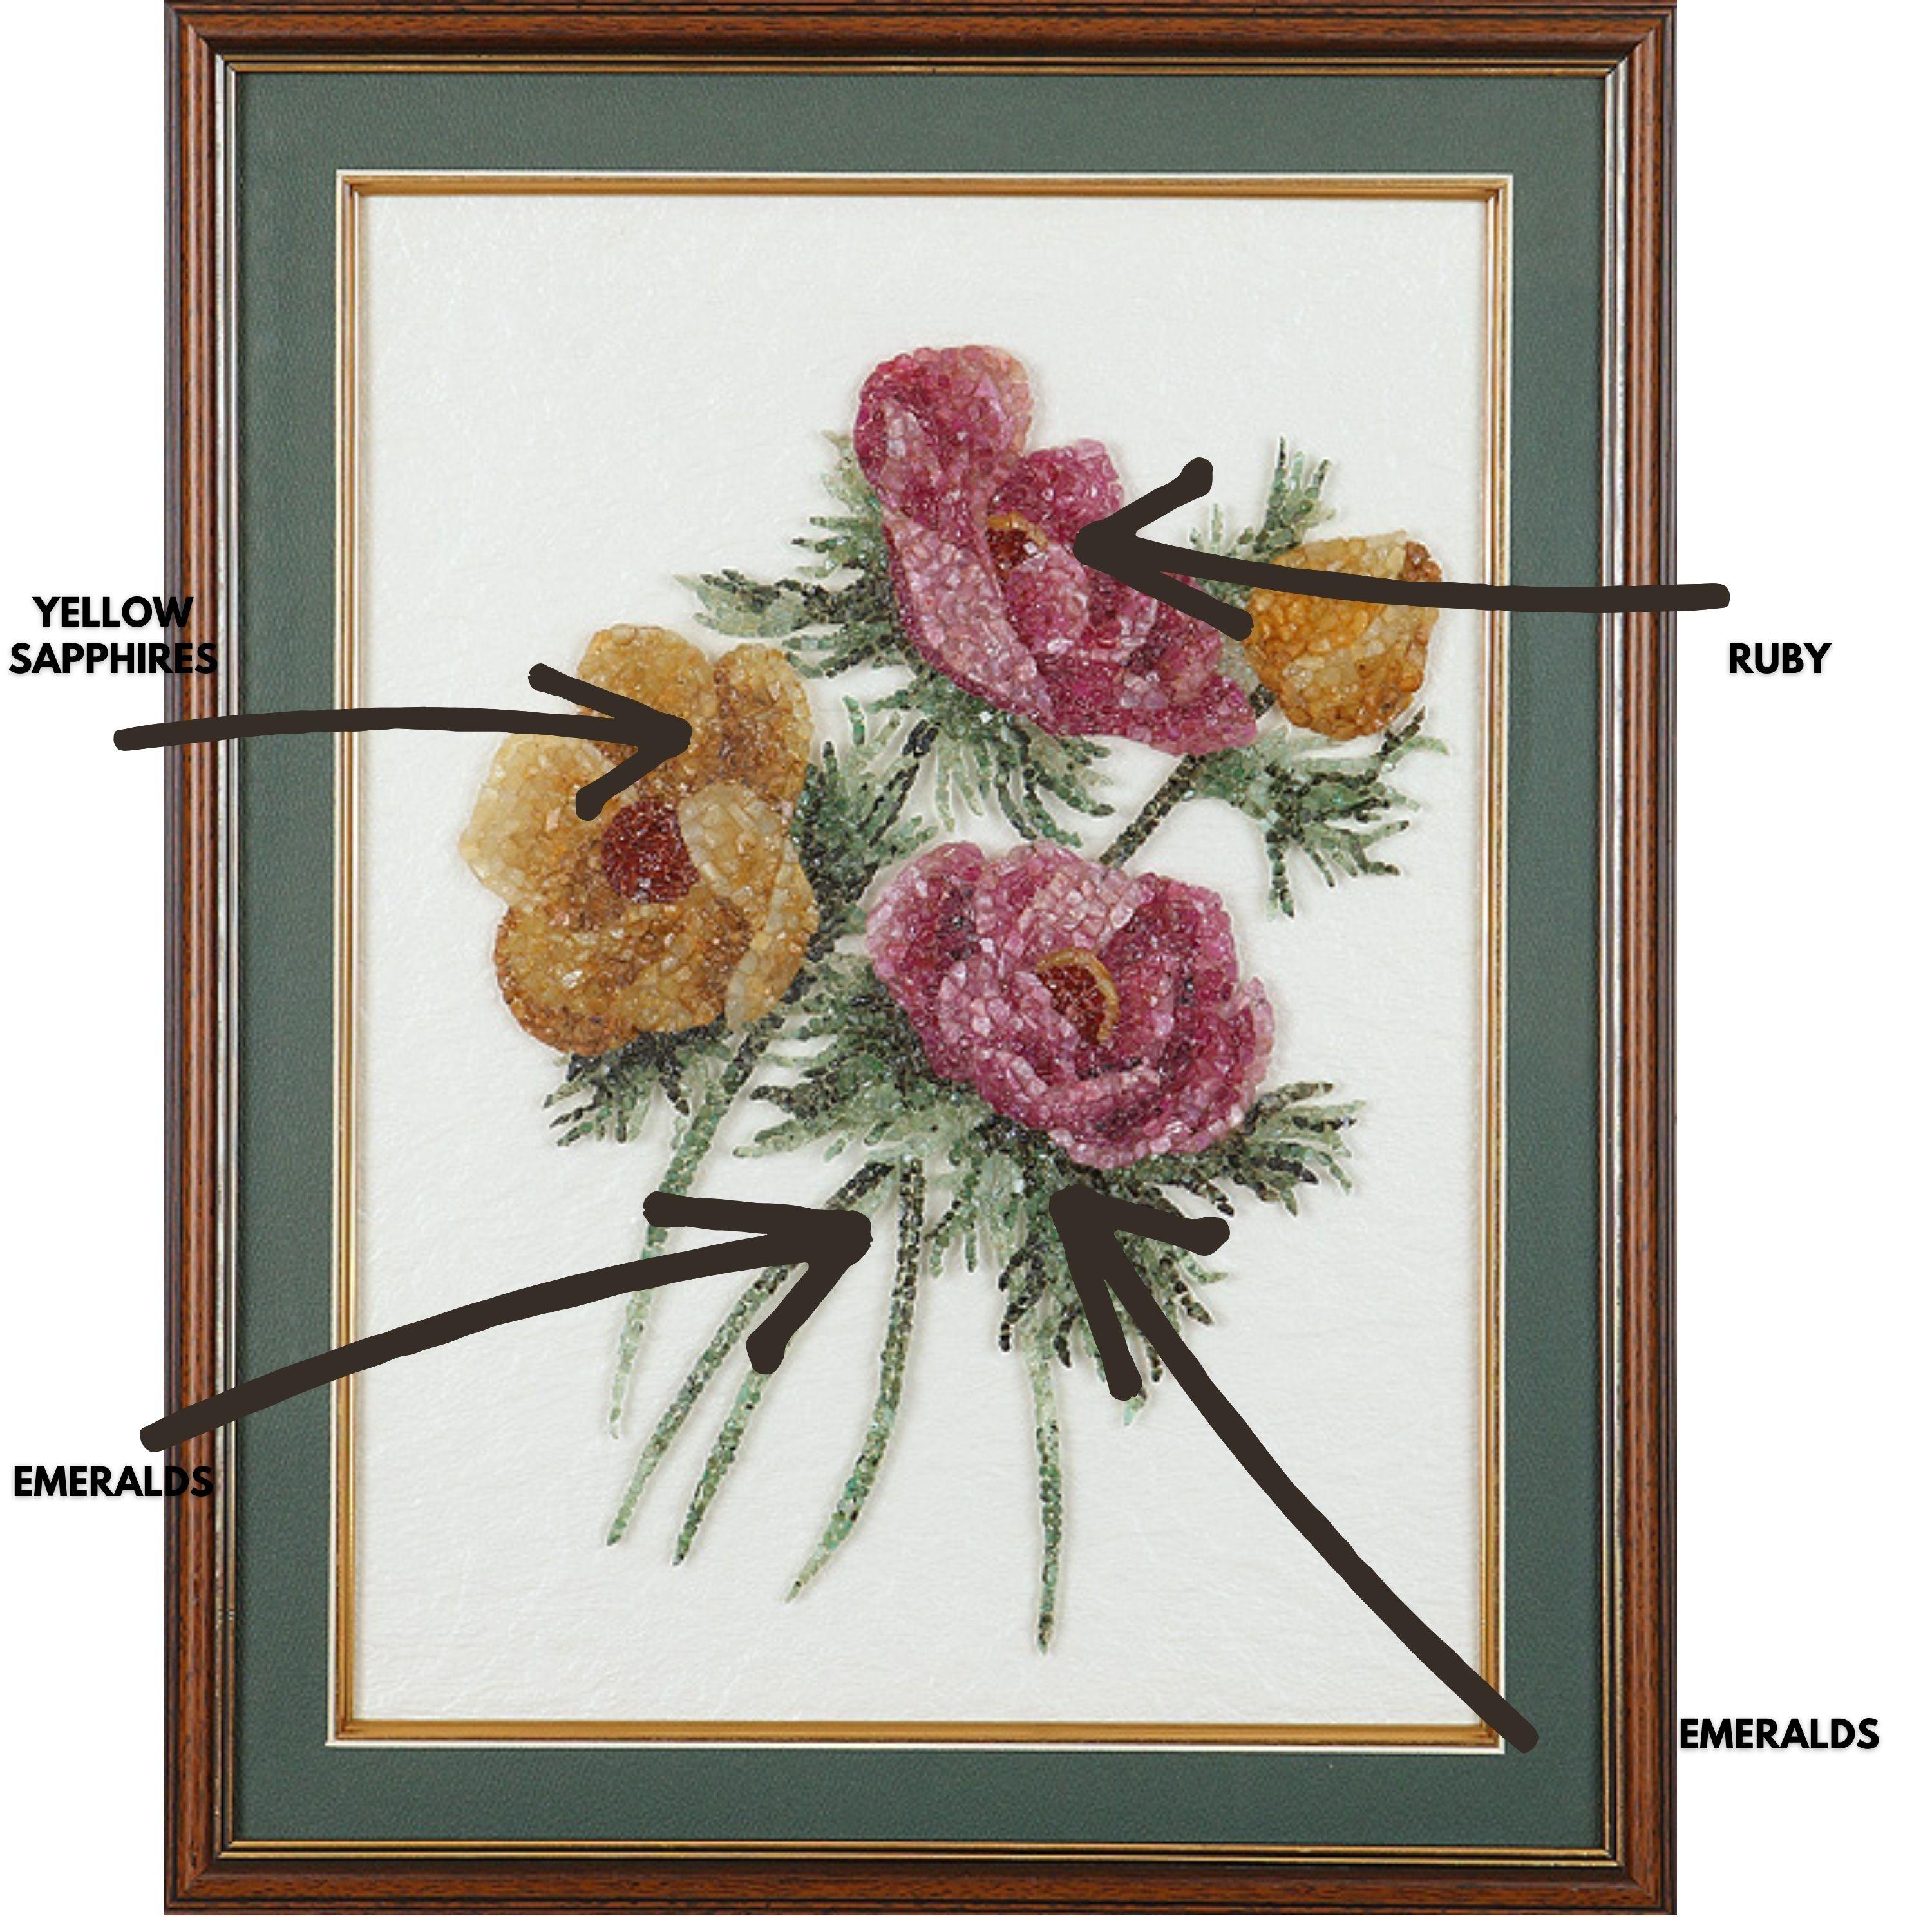 A very gorgeous Floral artwork made using Ruby, Emerald and Yellow Sapphire. The gemstones used in this artwork is completely natural, without any treatment. The size of the artwork is 20 inches x 16 inches. The frame is of a simple painted green